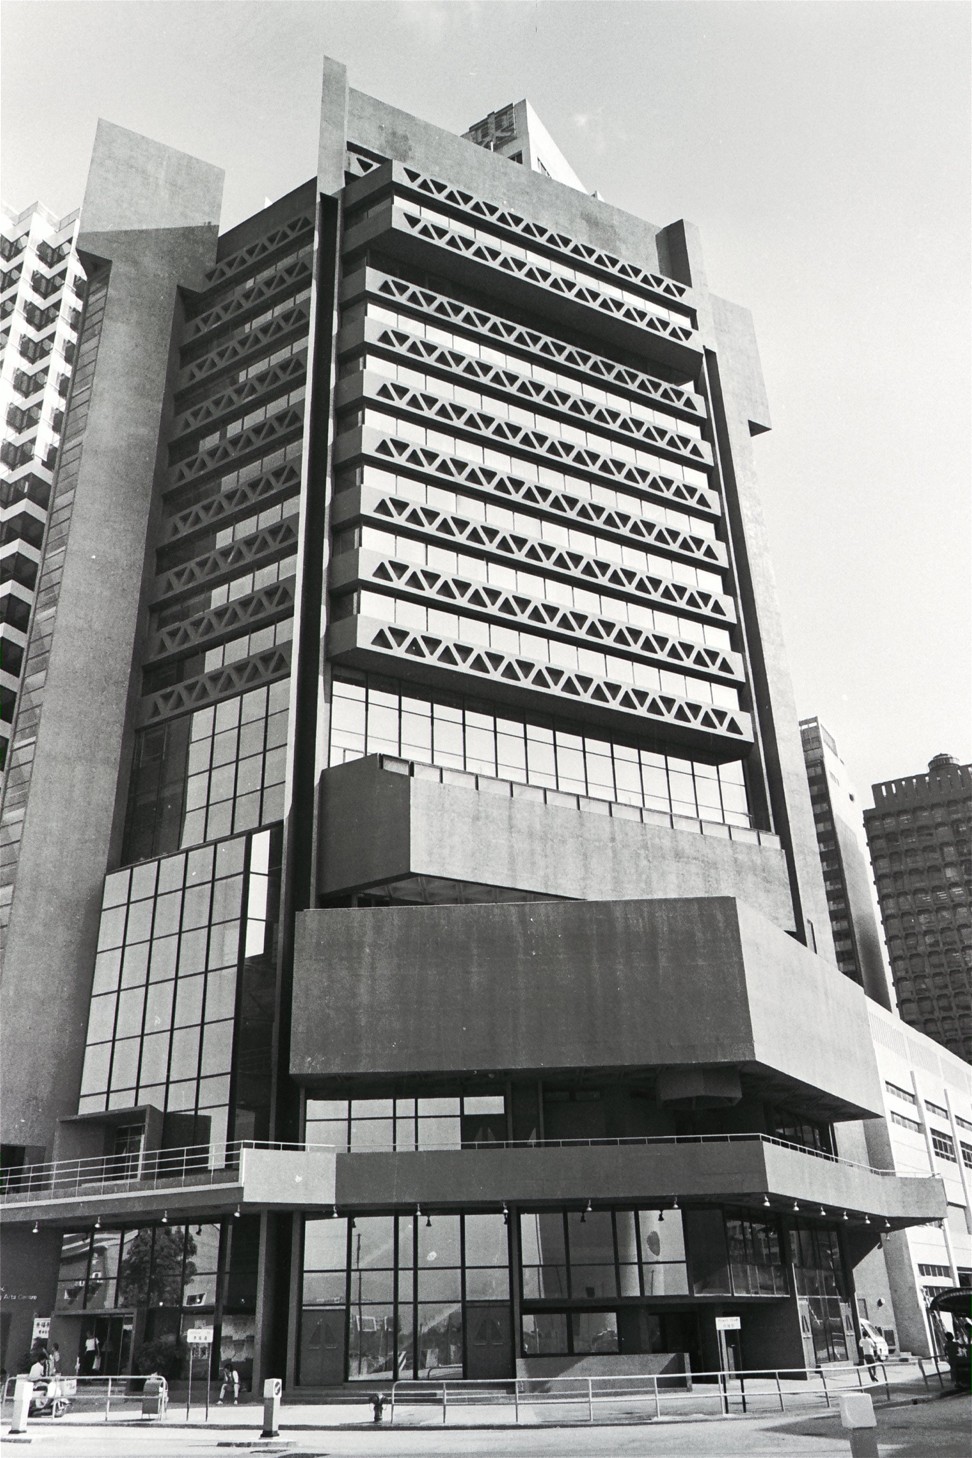 The Hong Kong Arts Centre building opened in 1977. Photo: SCMP